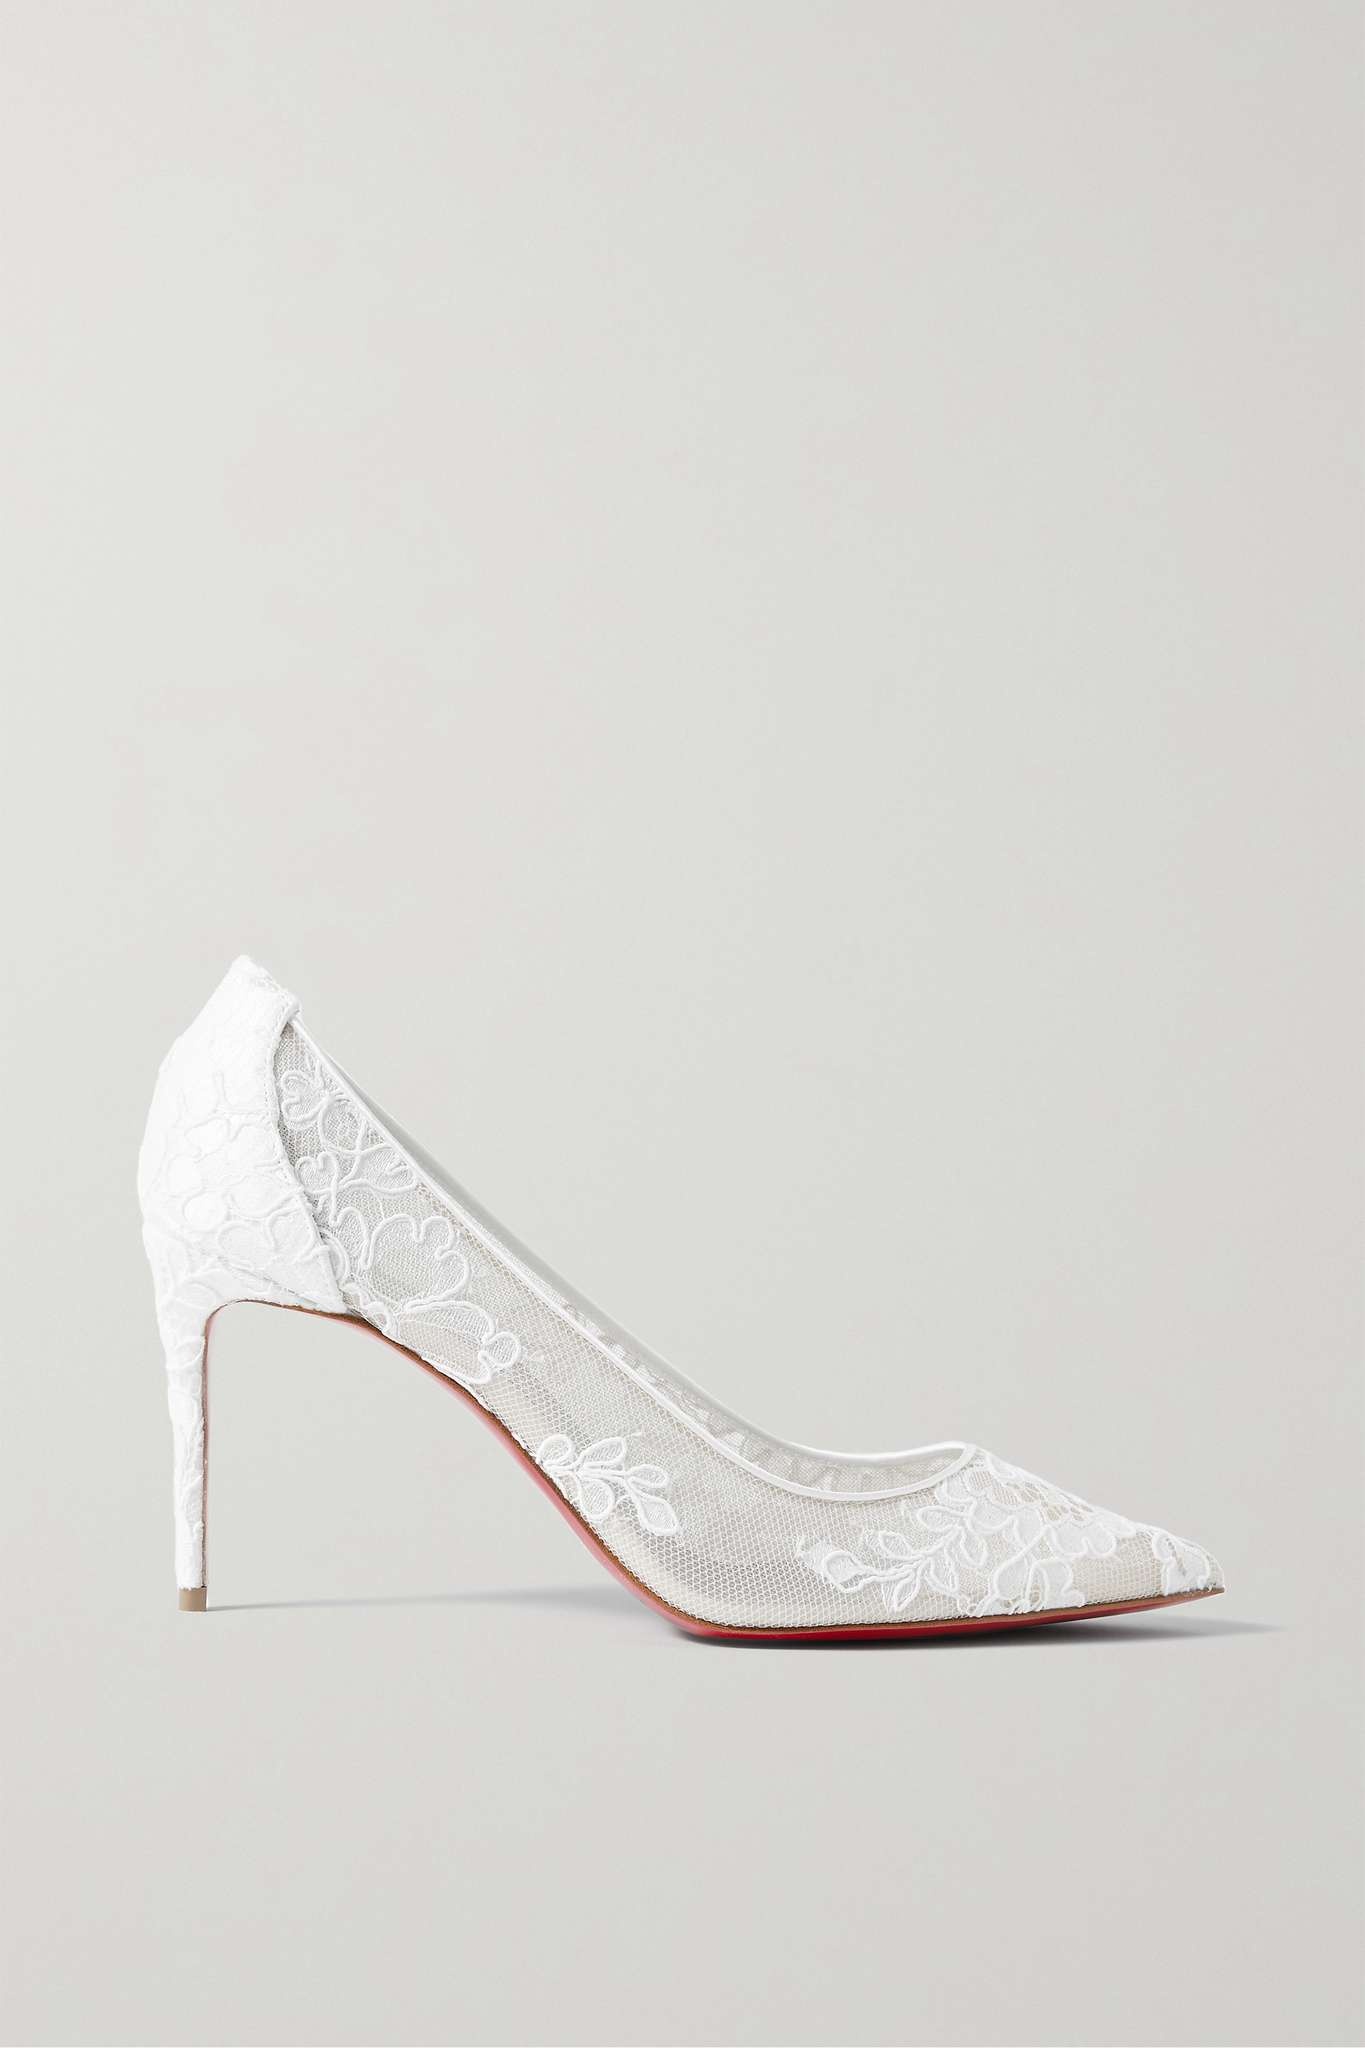 Christian Louboutin Me Dolly Strass Red Sole Slide Sandals in White